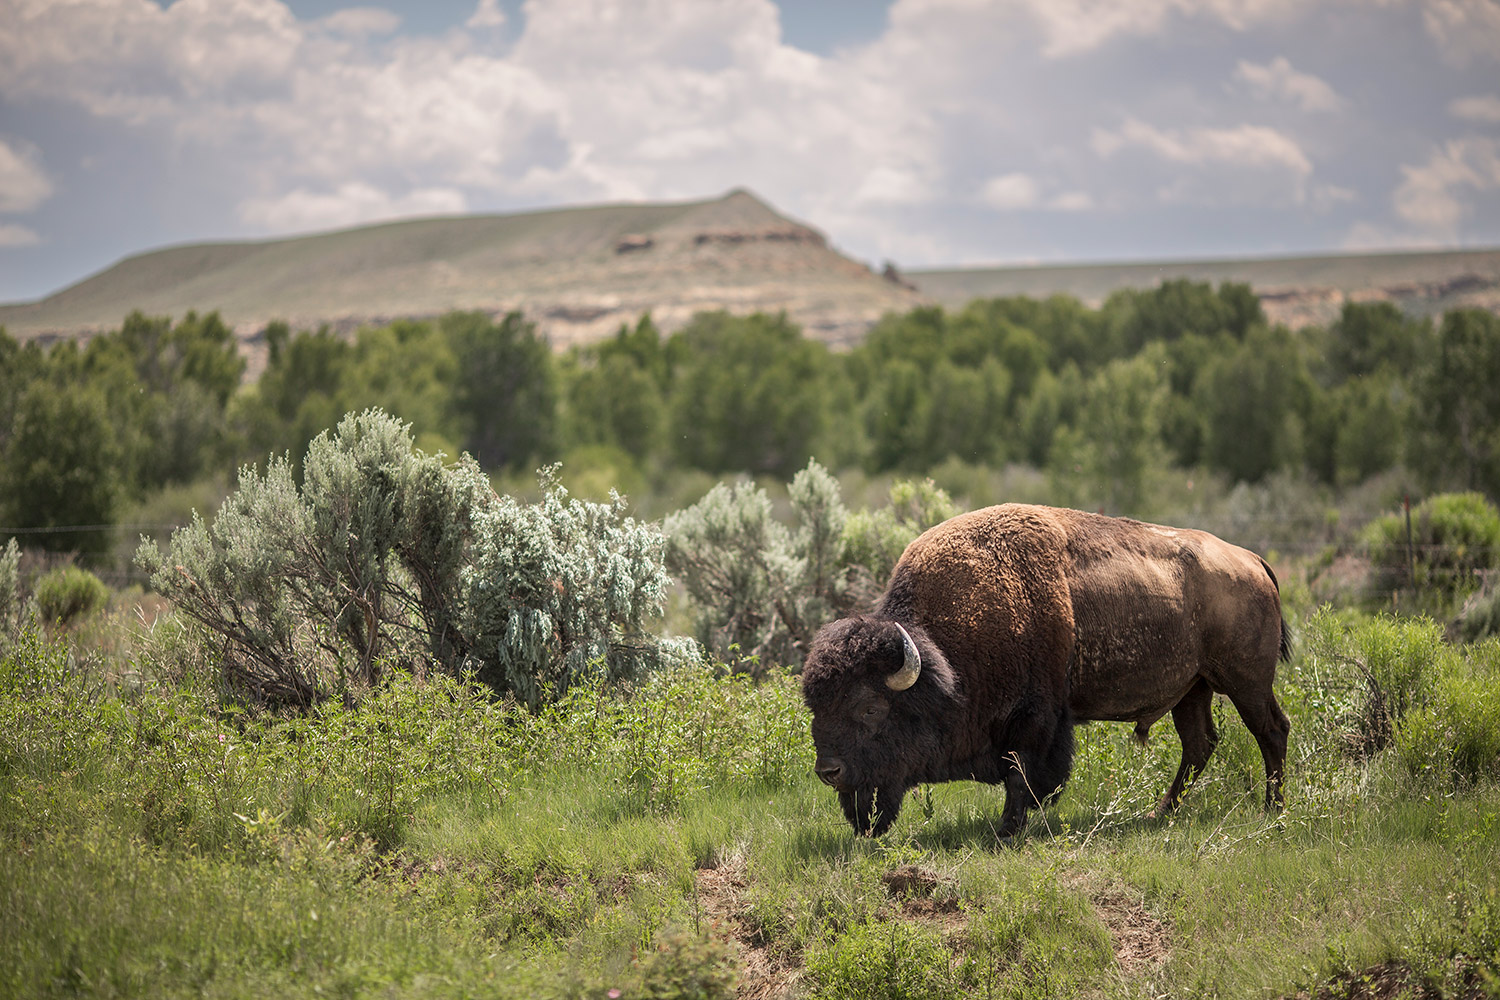 buffalo in prairie and low-shrub landscape